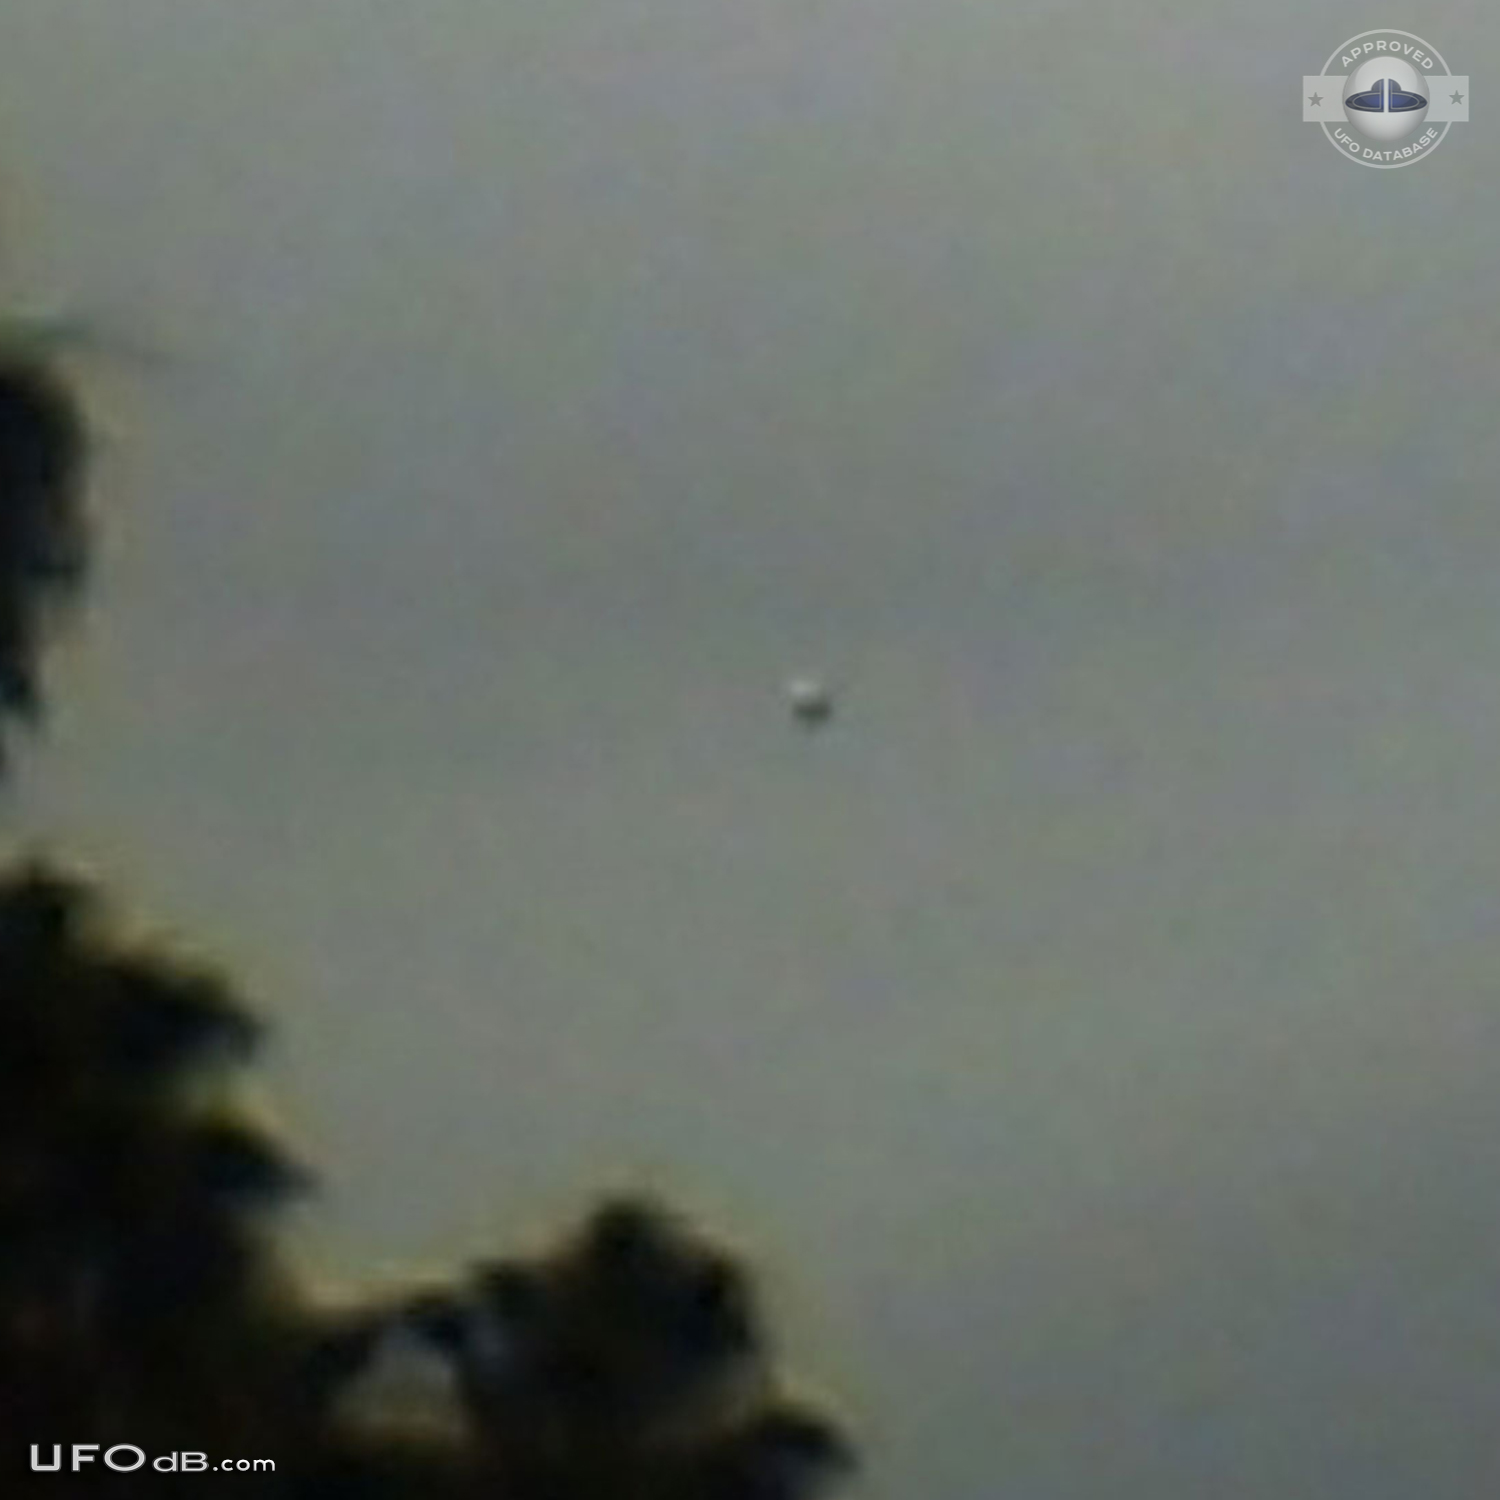 Dark UFO sphere caught on picture during storm in Los Angeles in 2009 UFO Picture #420-2